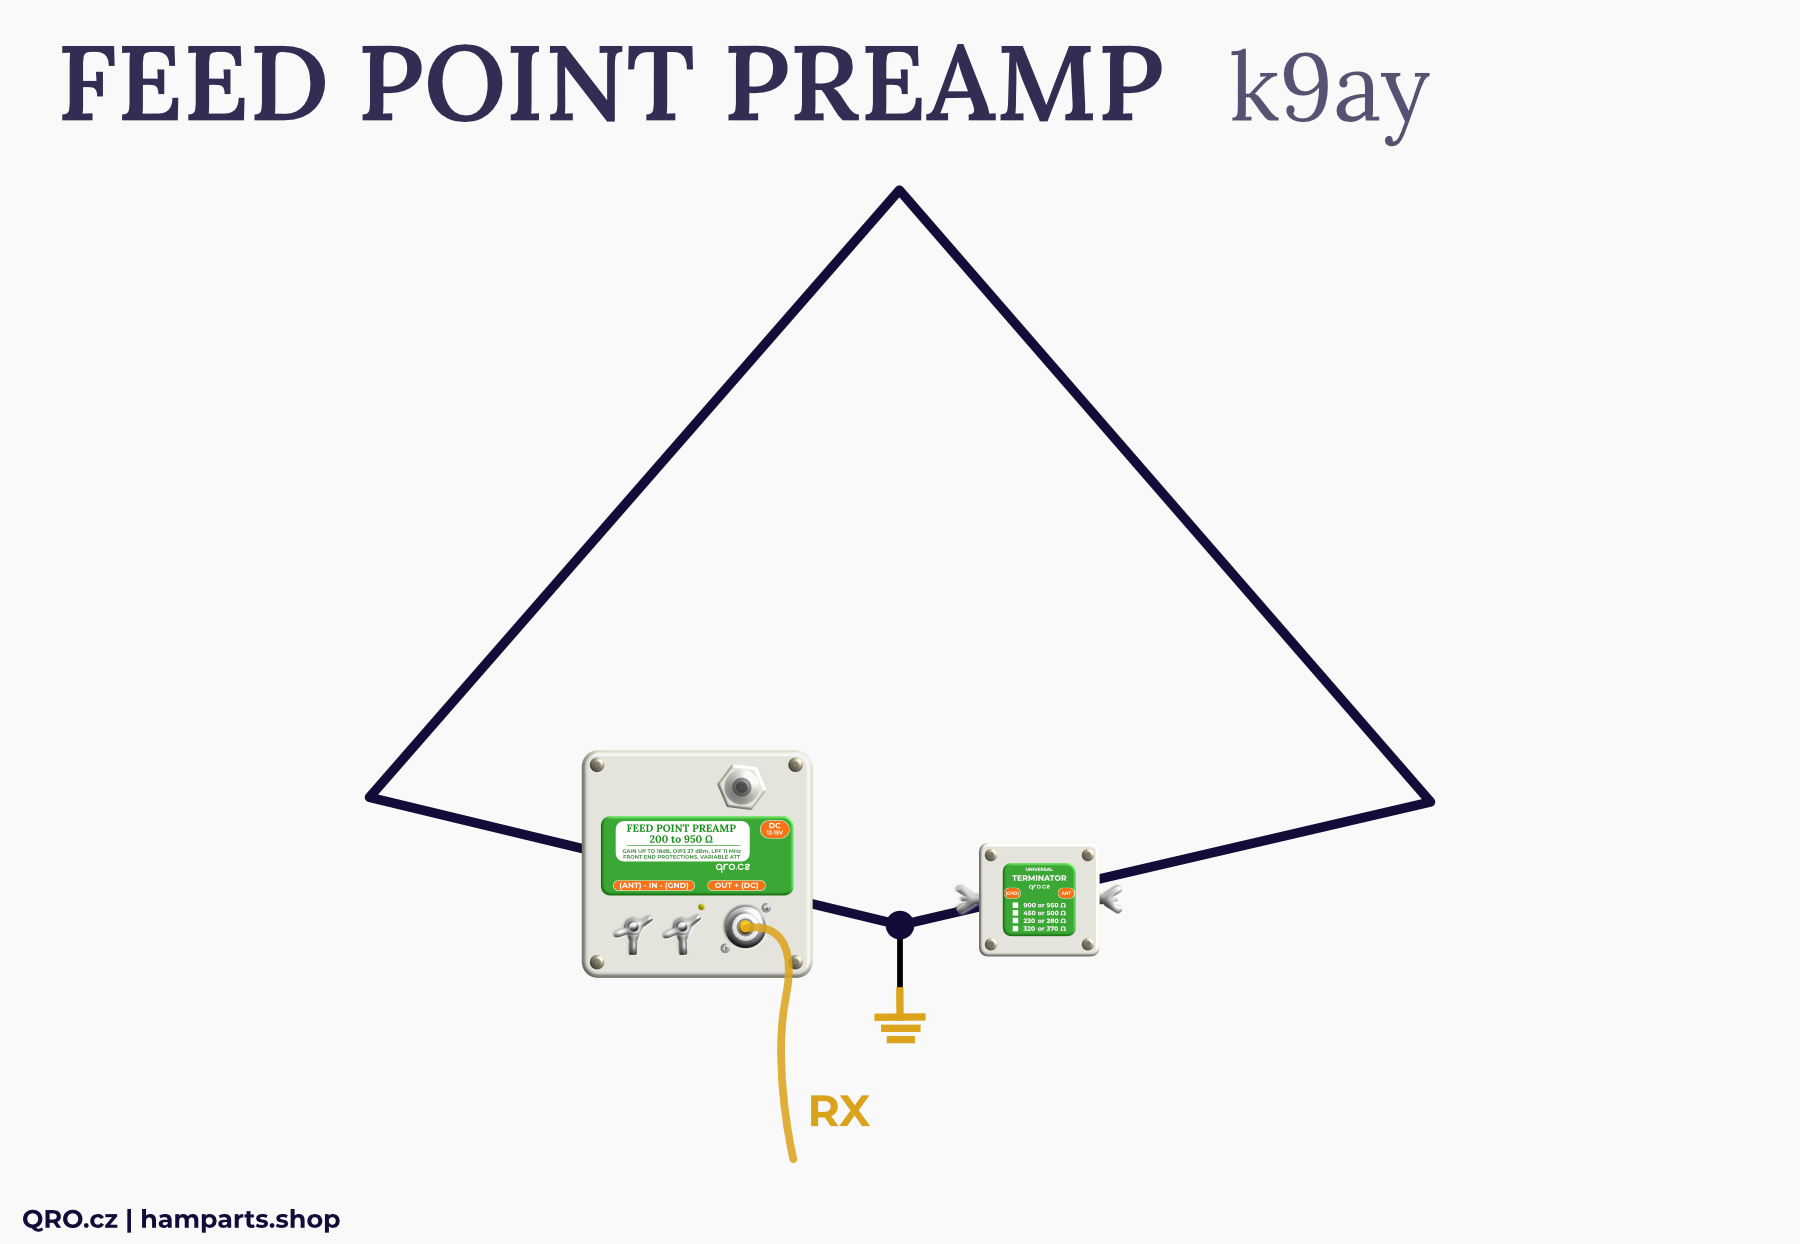 feed point preamp box with universal terminator with K9AY by qro.cz hamparts.shop